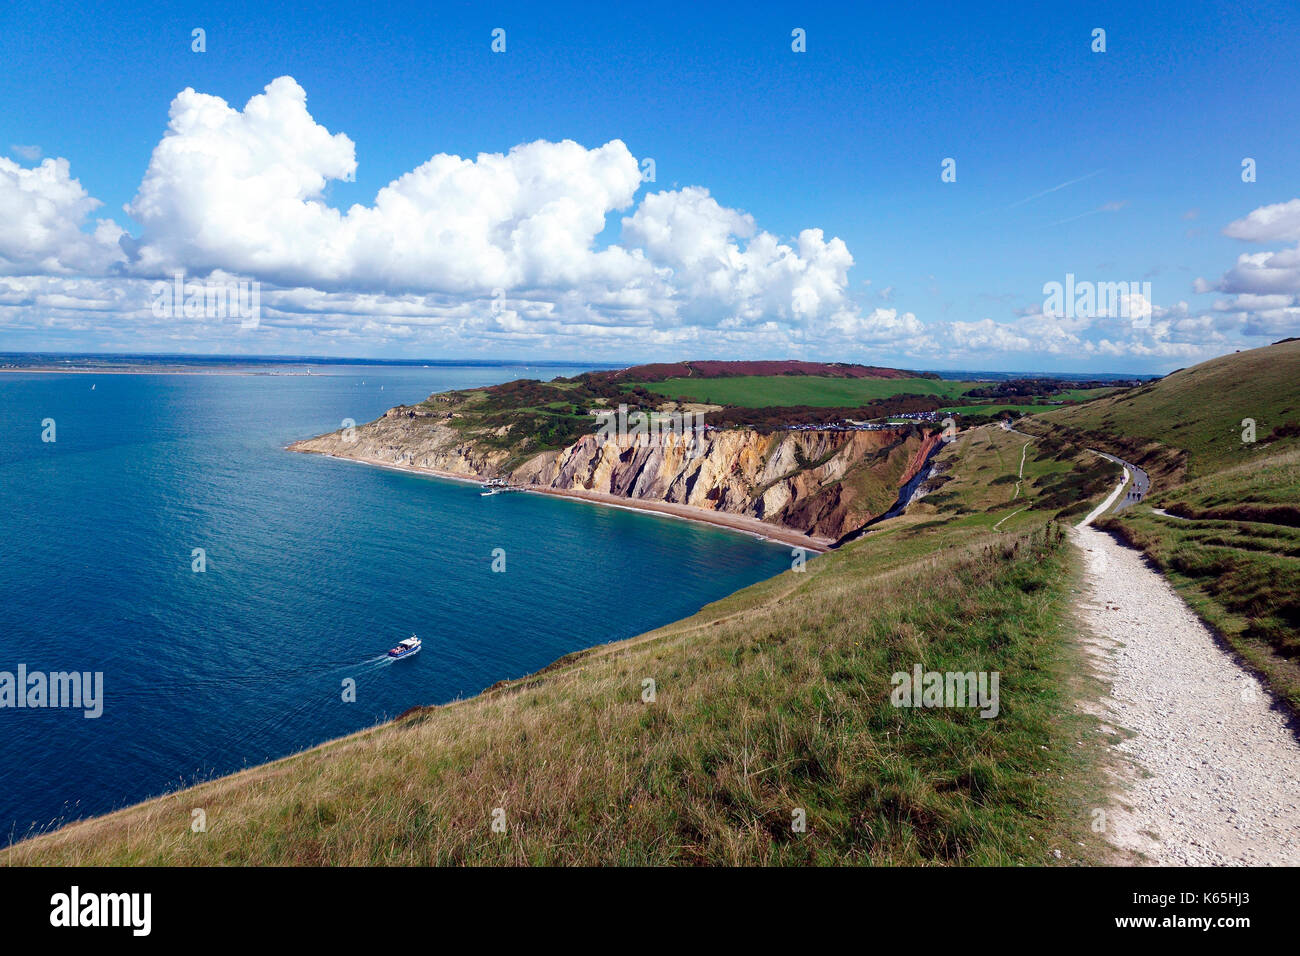 ALUM BAY CHINE FROM THE FOOT PATH Stock Photo - Alamy